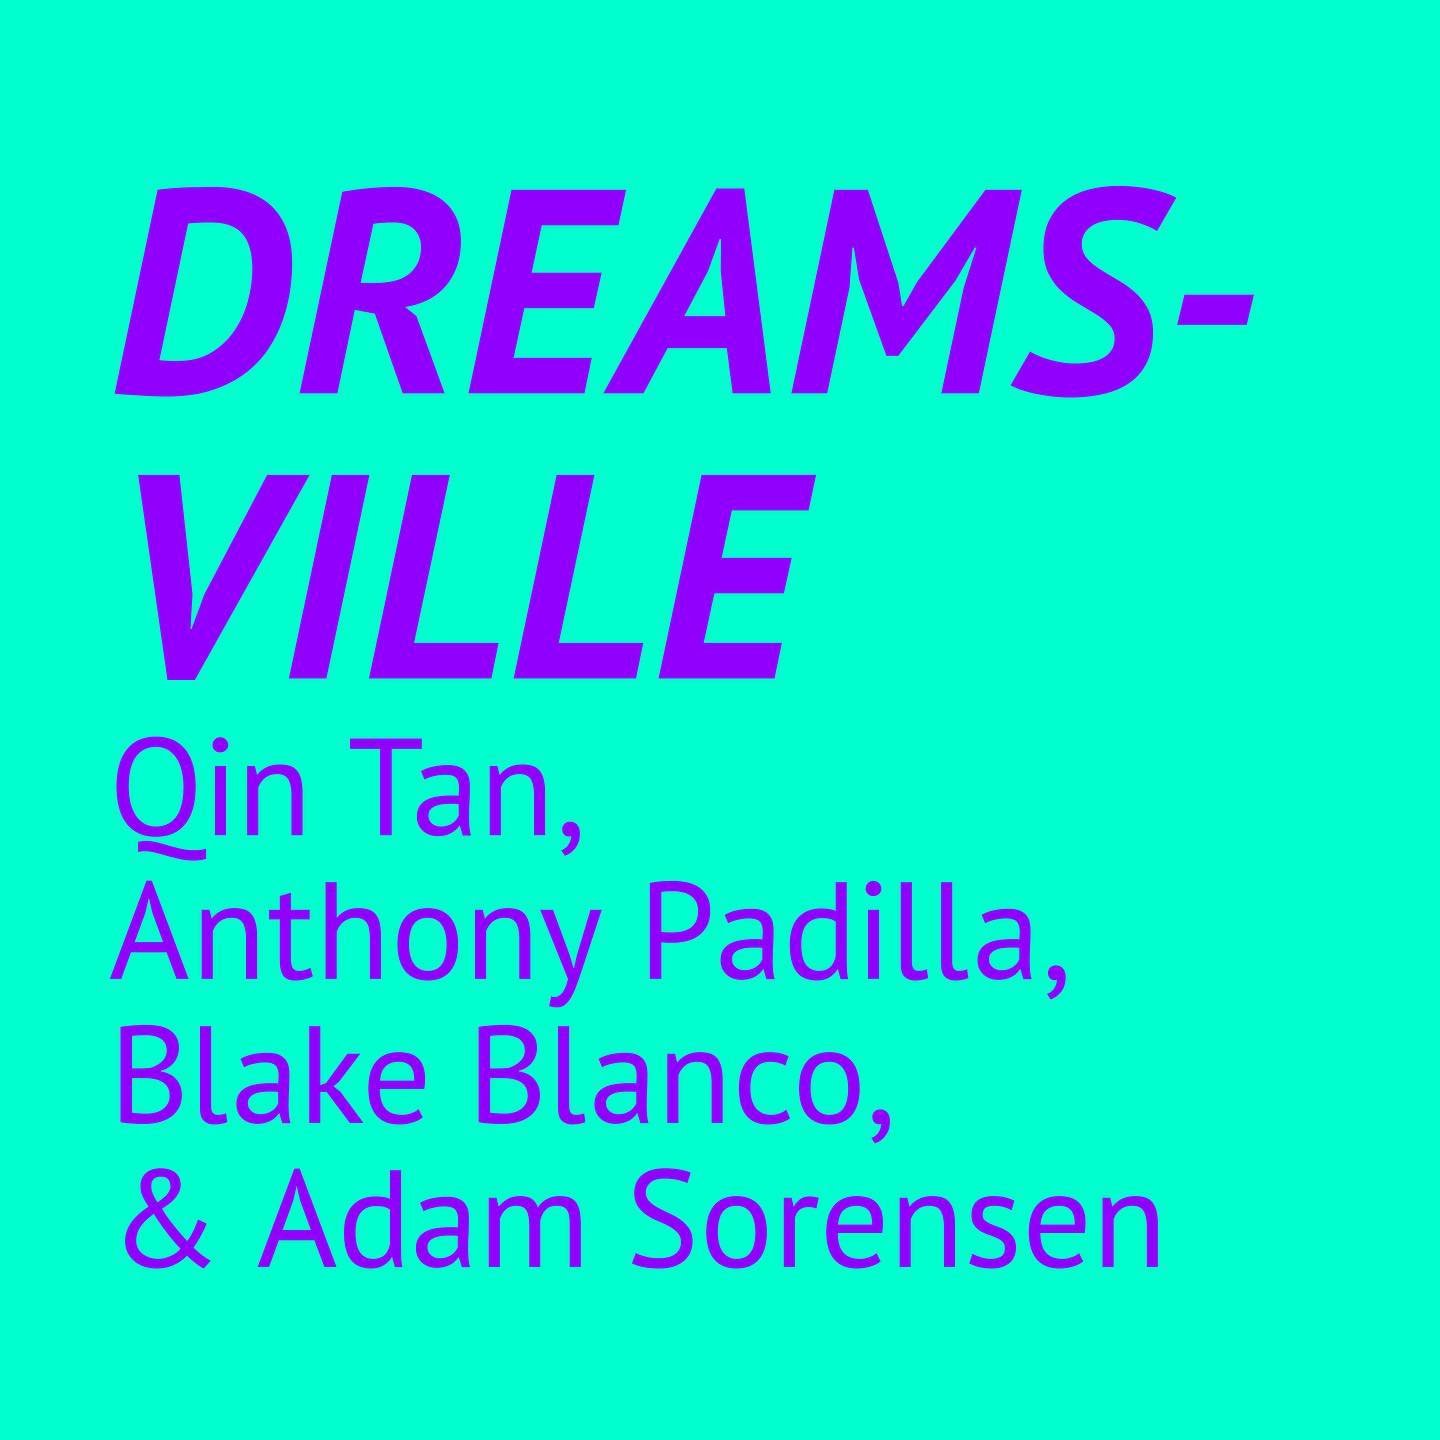 ✨☀️🌼Join us at the opening reception of &lsquo;DREAMSVILLE&rsquo;. Coming Saturday, the 4th of May, 4-7pm! 🌼☀️✨

&lsquo;DREAMSVILLE&lsquo; features work by Qin Tan, Anthony Padilla, Blake Blanco &amp; Adam Sorensen. The paintings included in this e